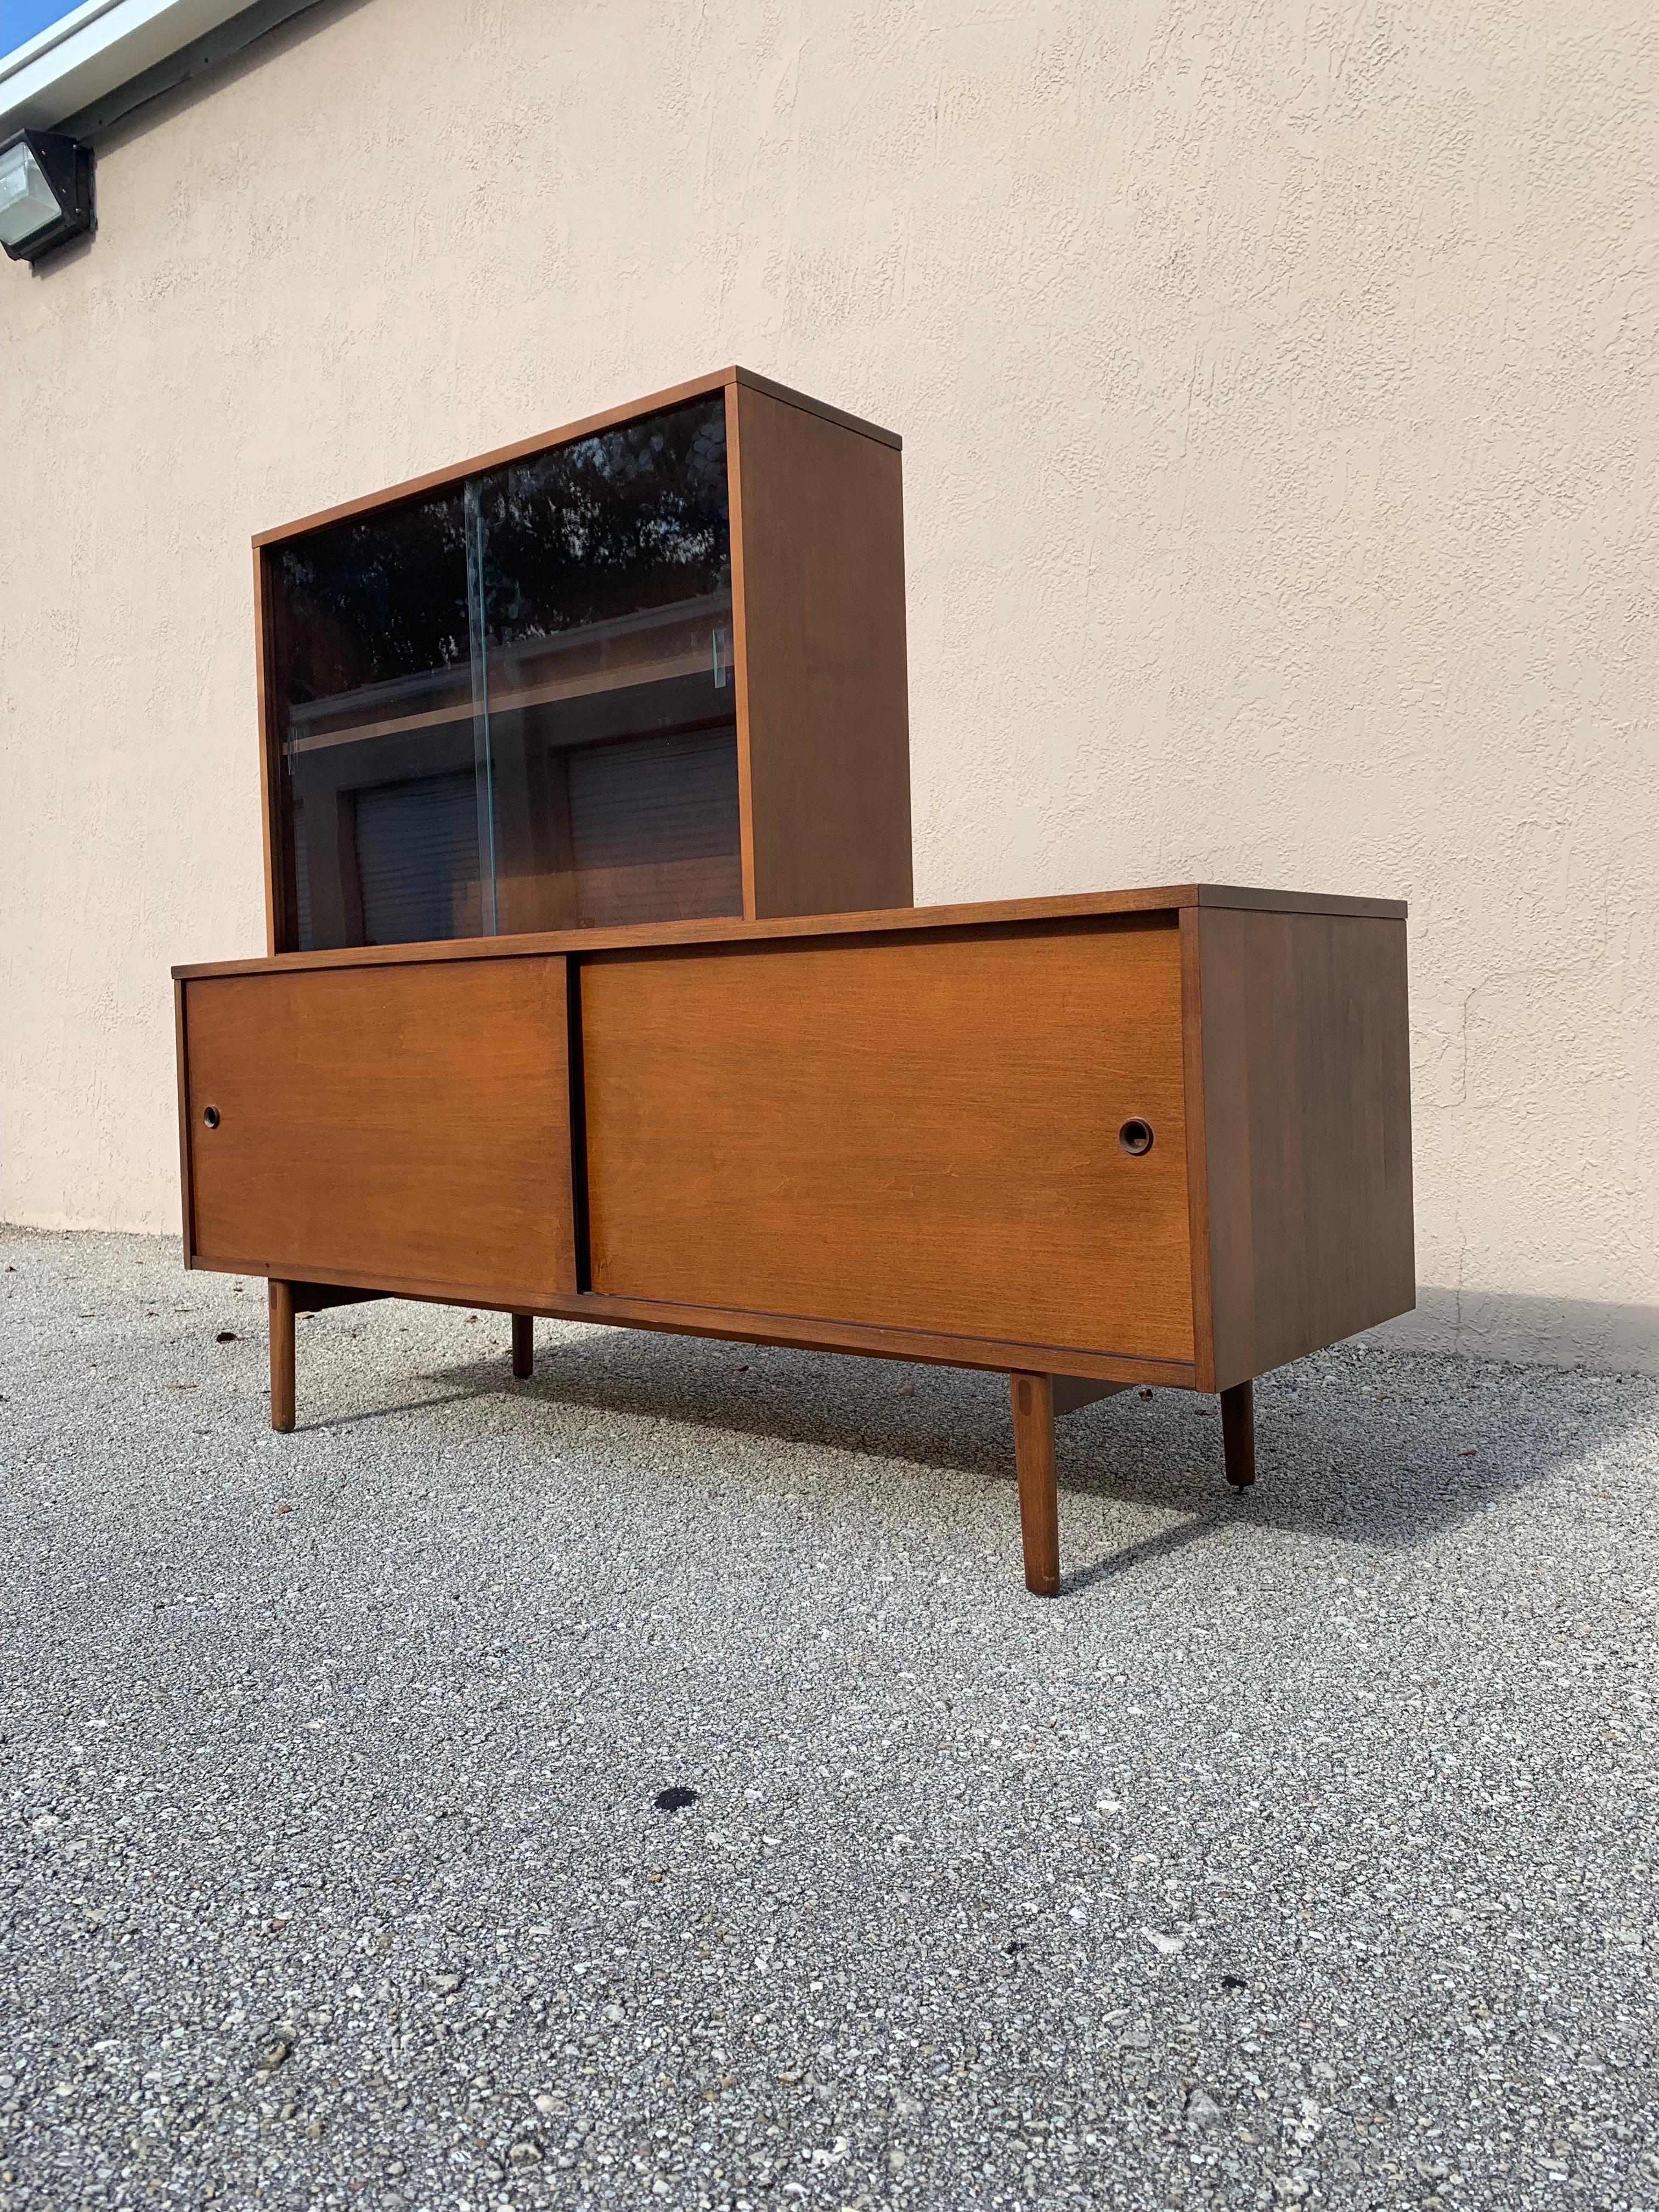 American Mid-Century Modern Credenza by Paul McCobb for Planner Group #1513 For Sale